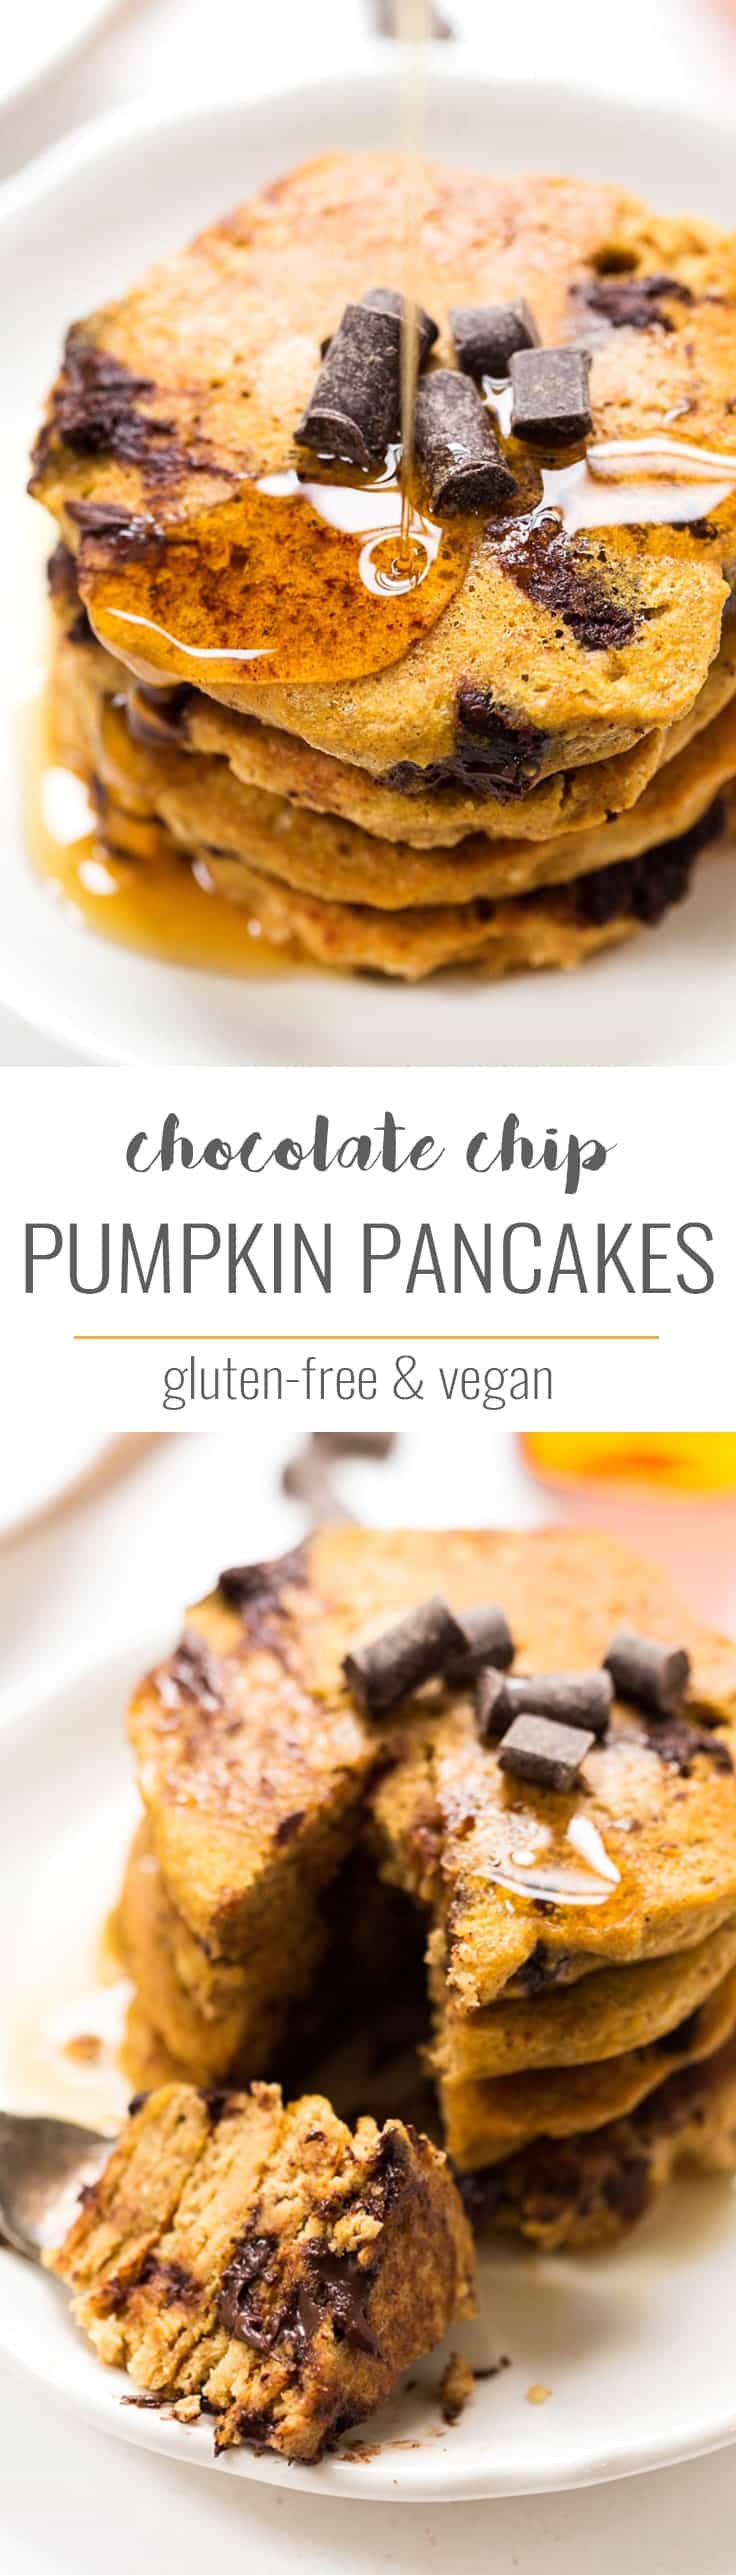 These VEGAN Pumpkin Chocolate Chip Pancakes are the perfect healthy treat to start your day. Packed with fiber, they're also free of the top 8 allergens!